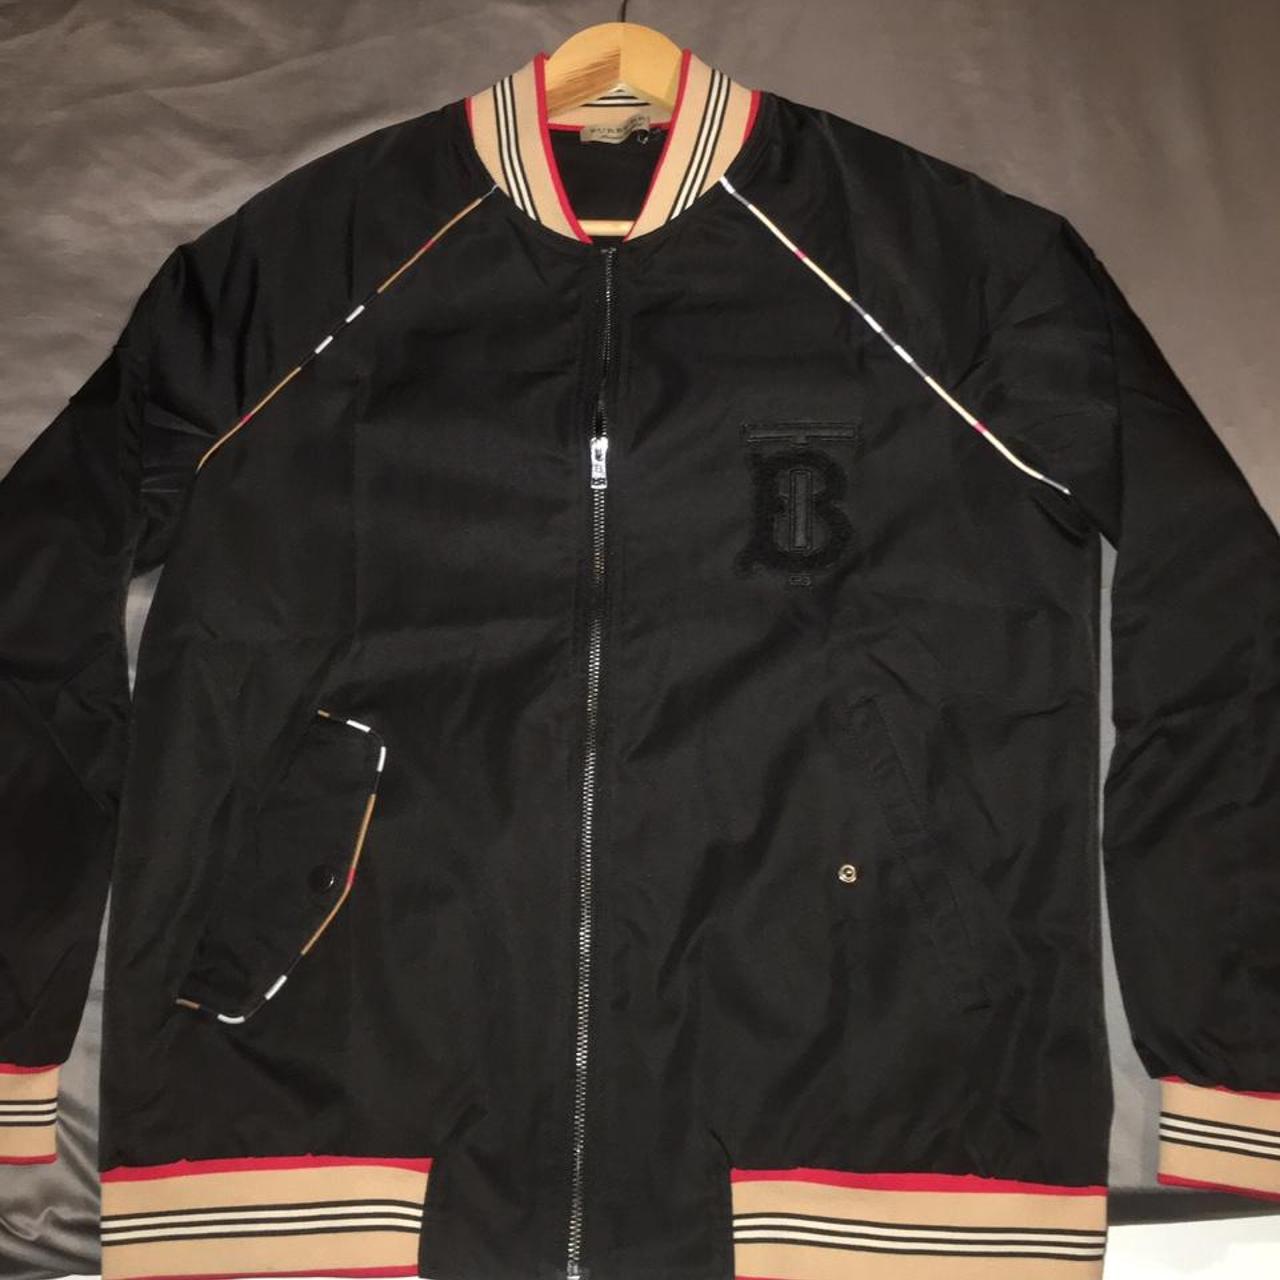 Thomas Burberry vintage bomber jacket, in extremely... - Depop